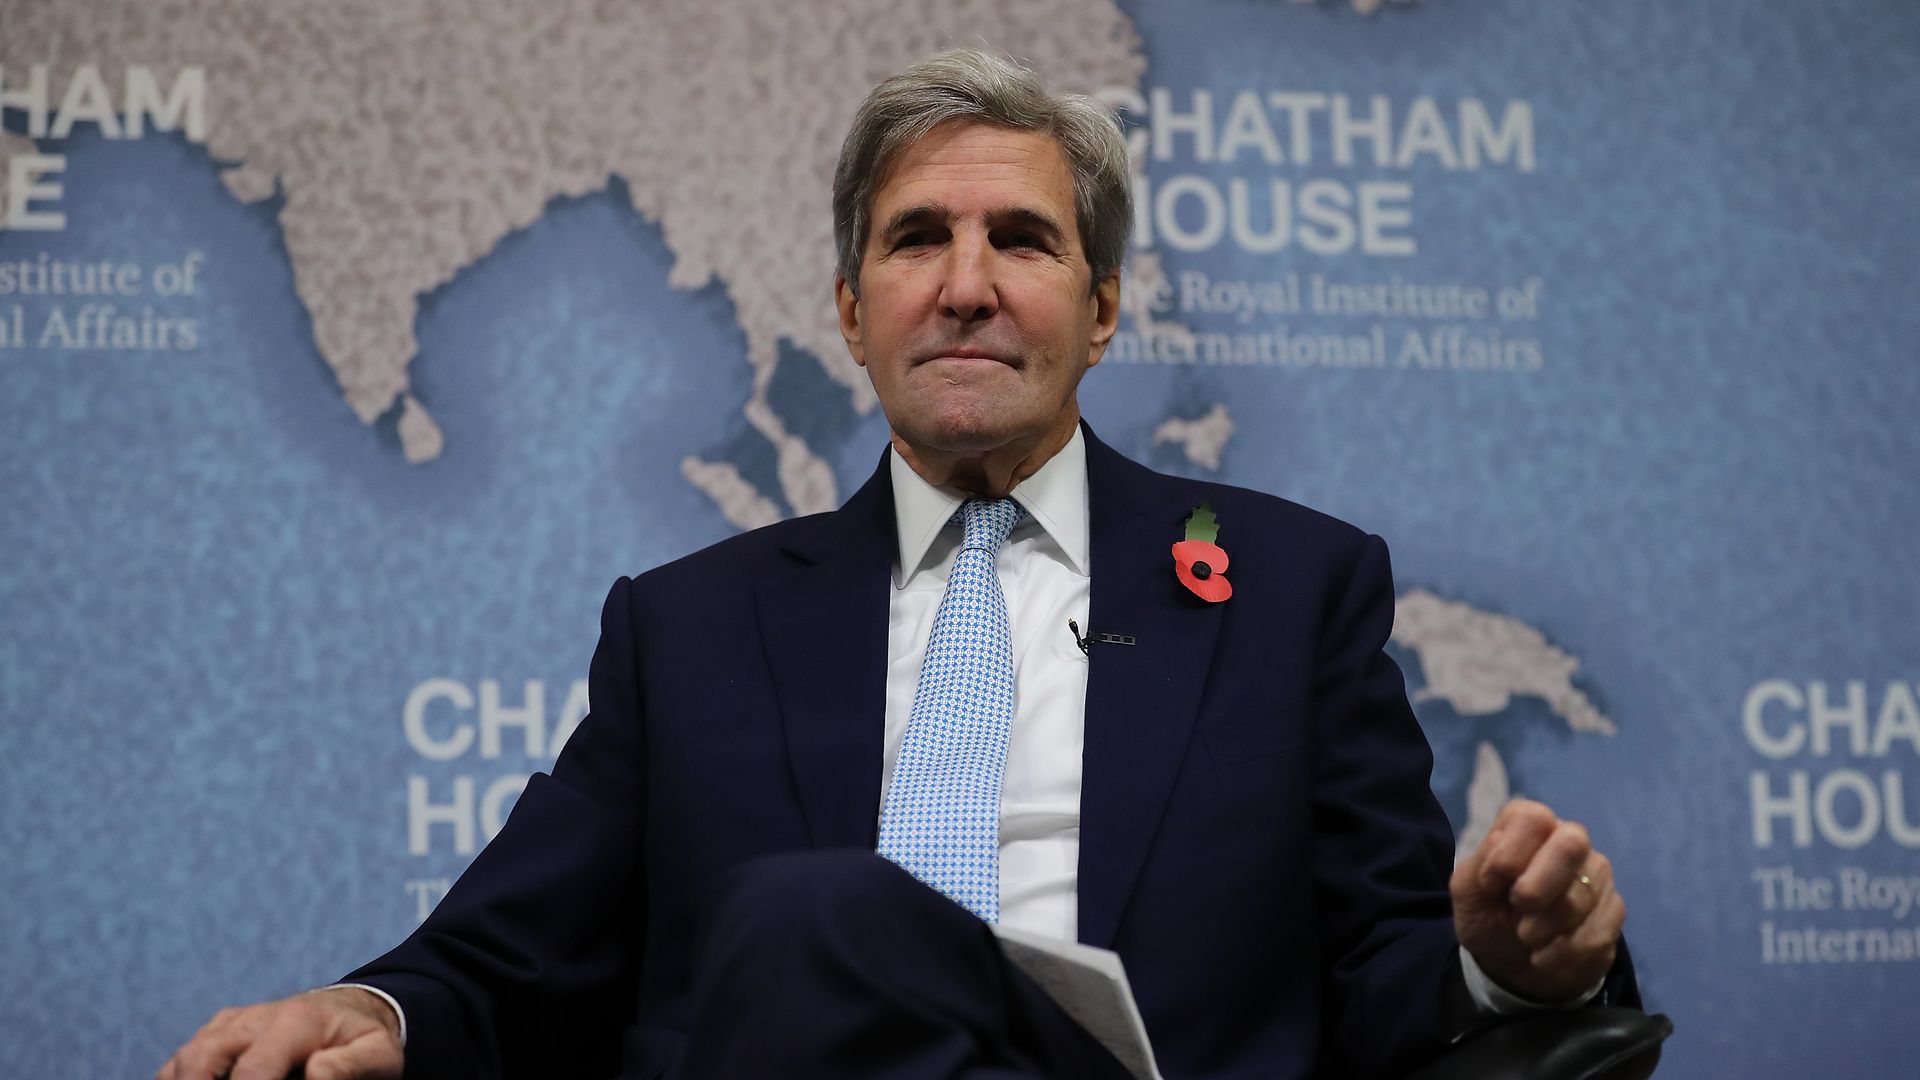 John Kerry speaks at the Chatham House event